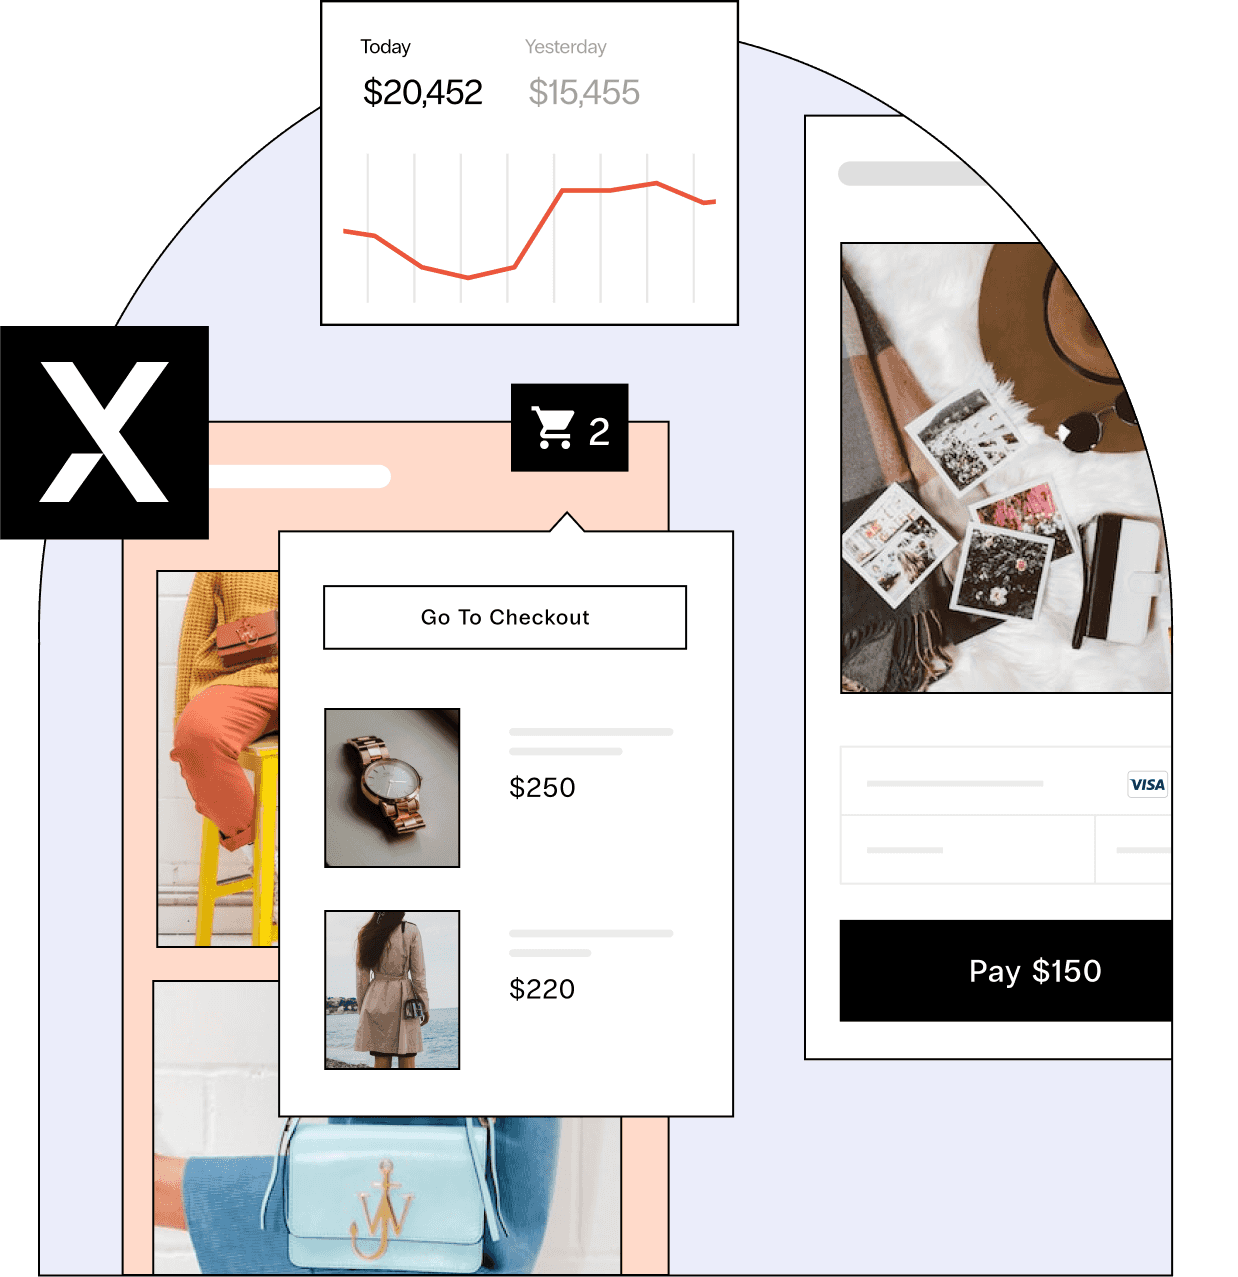 Snapshots of a sophisticated fashion store hosted on Nexcess, drop down cart descriptions, dynamic product pages, with $20,452 revenue today.